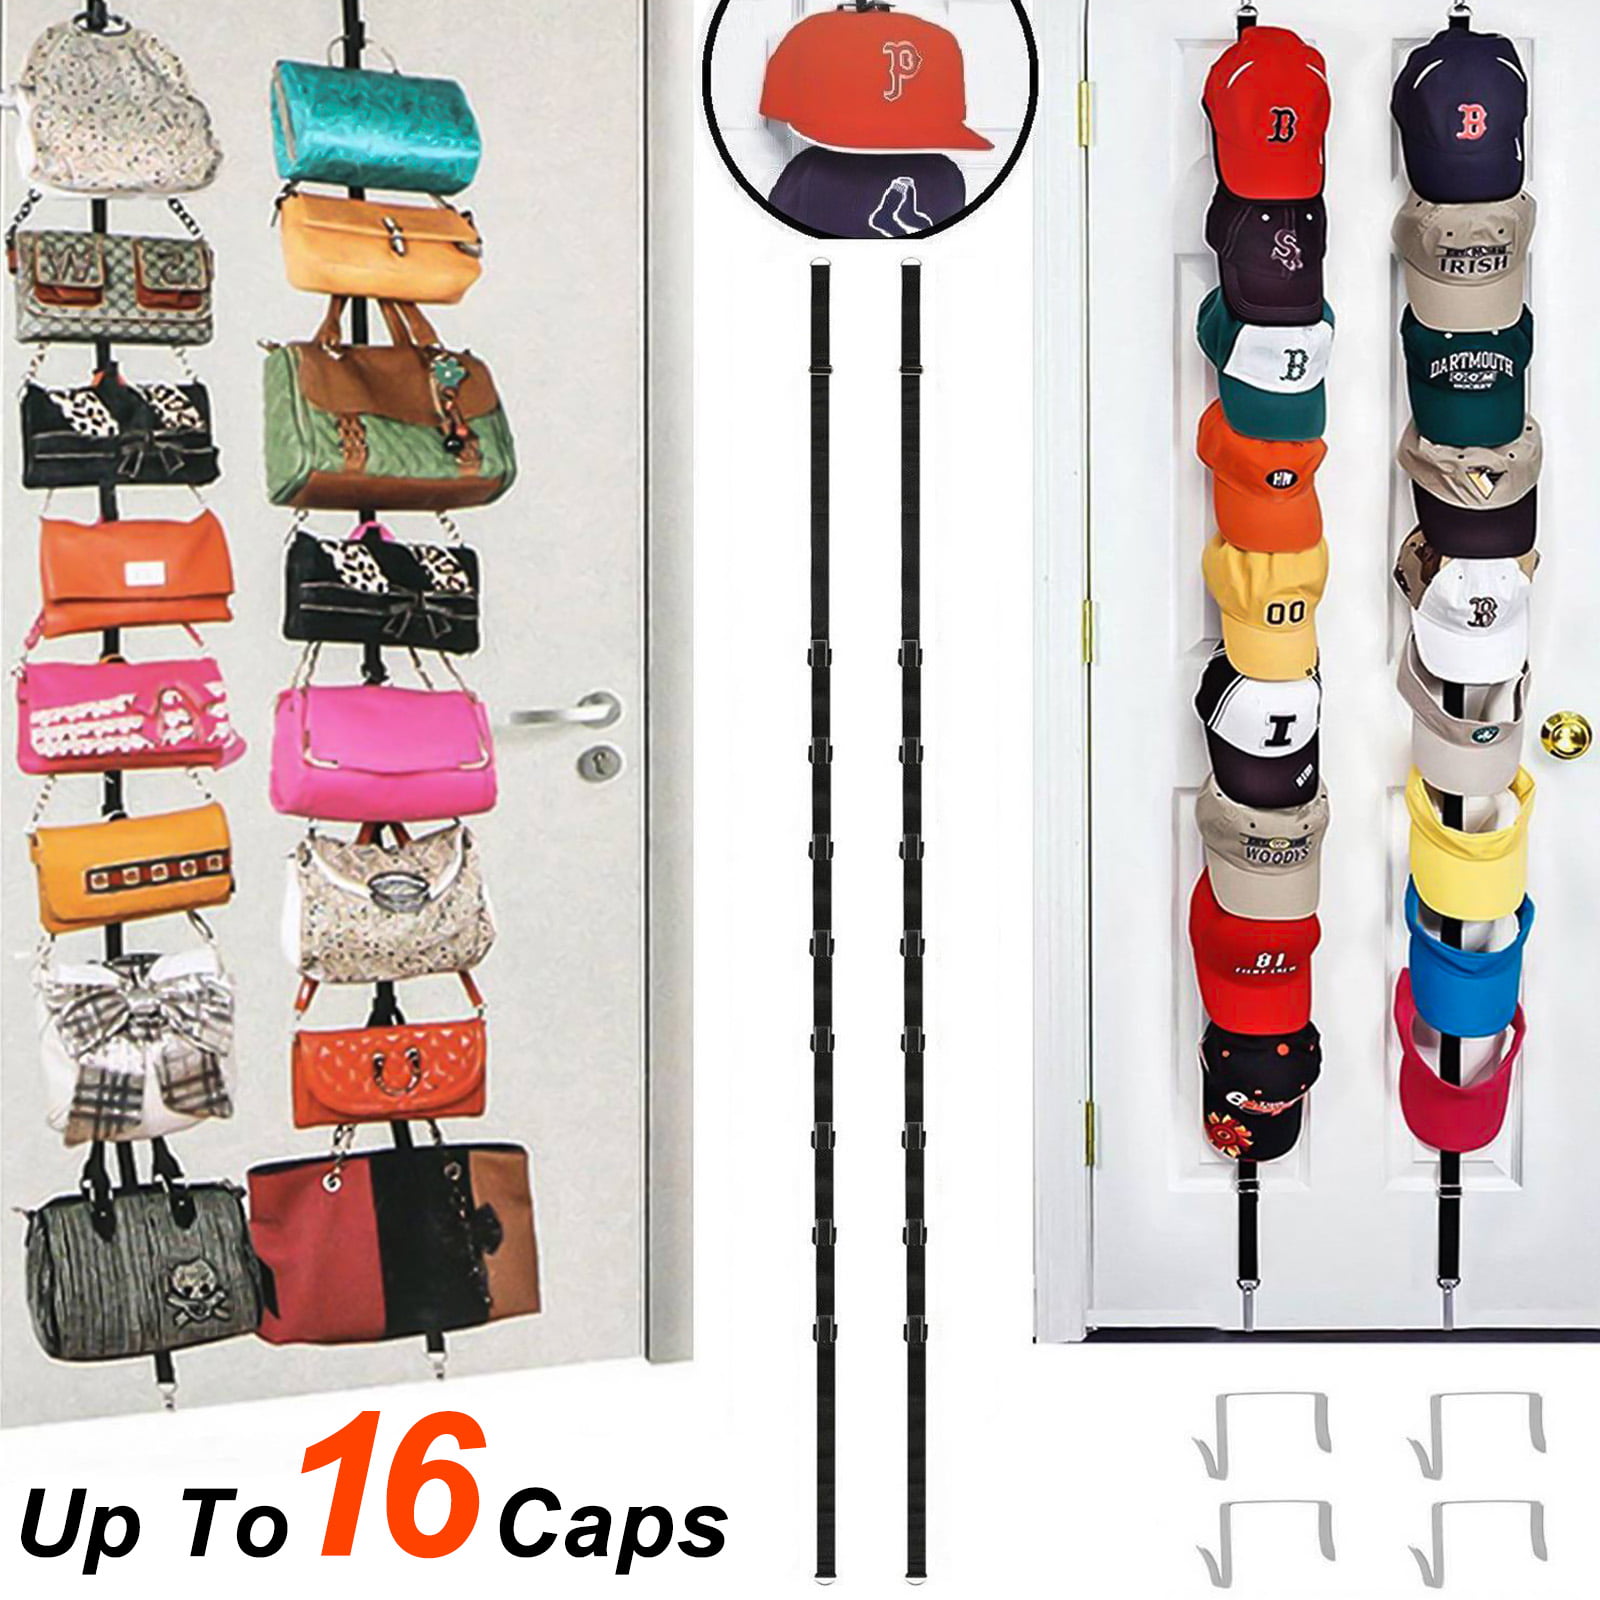 EXPANDABLE DISPLAY HANGING RACK 20 METAL CLIPS flags caps hats ceiling hanger 